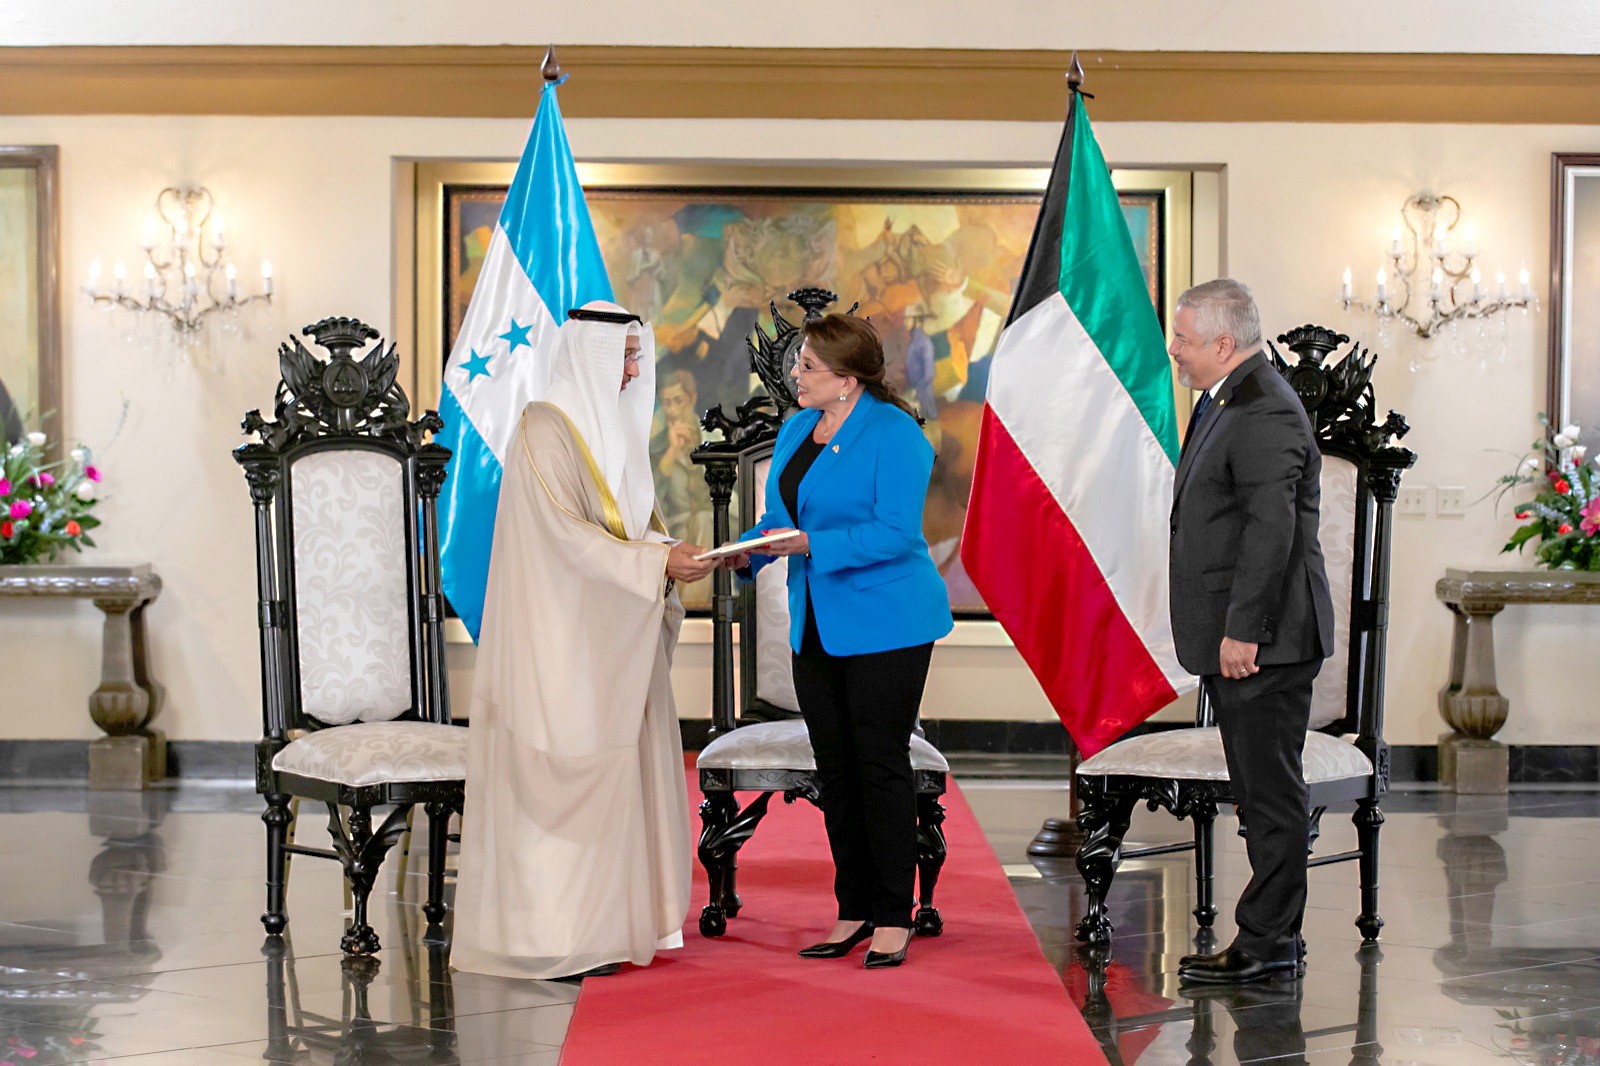 Kuwait envoy to Mexico presents credentials as non-resident amb. to Honduras